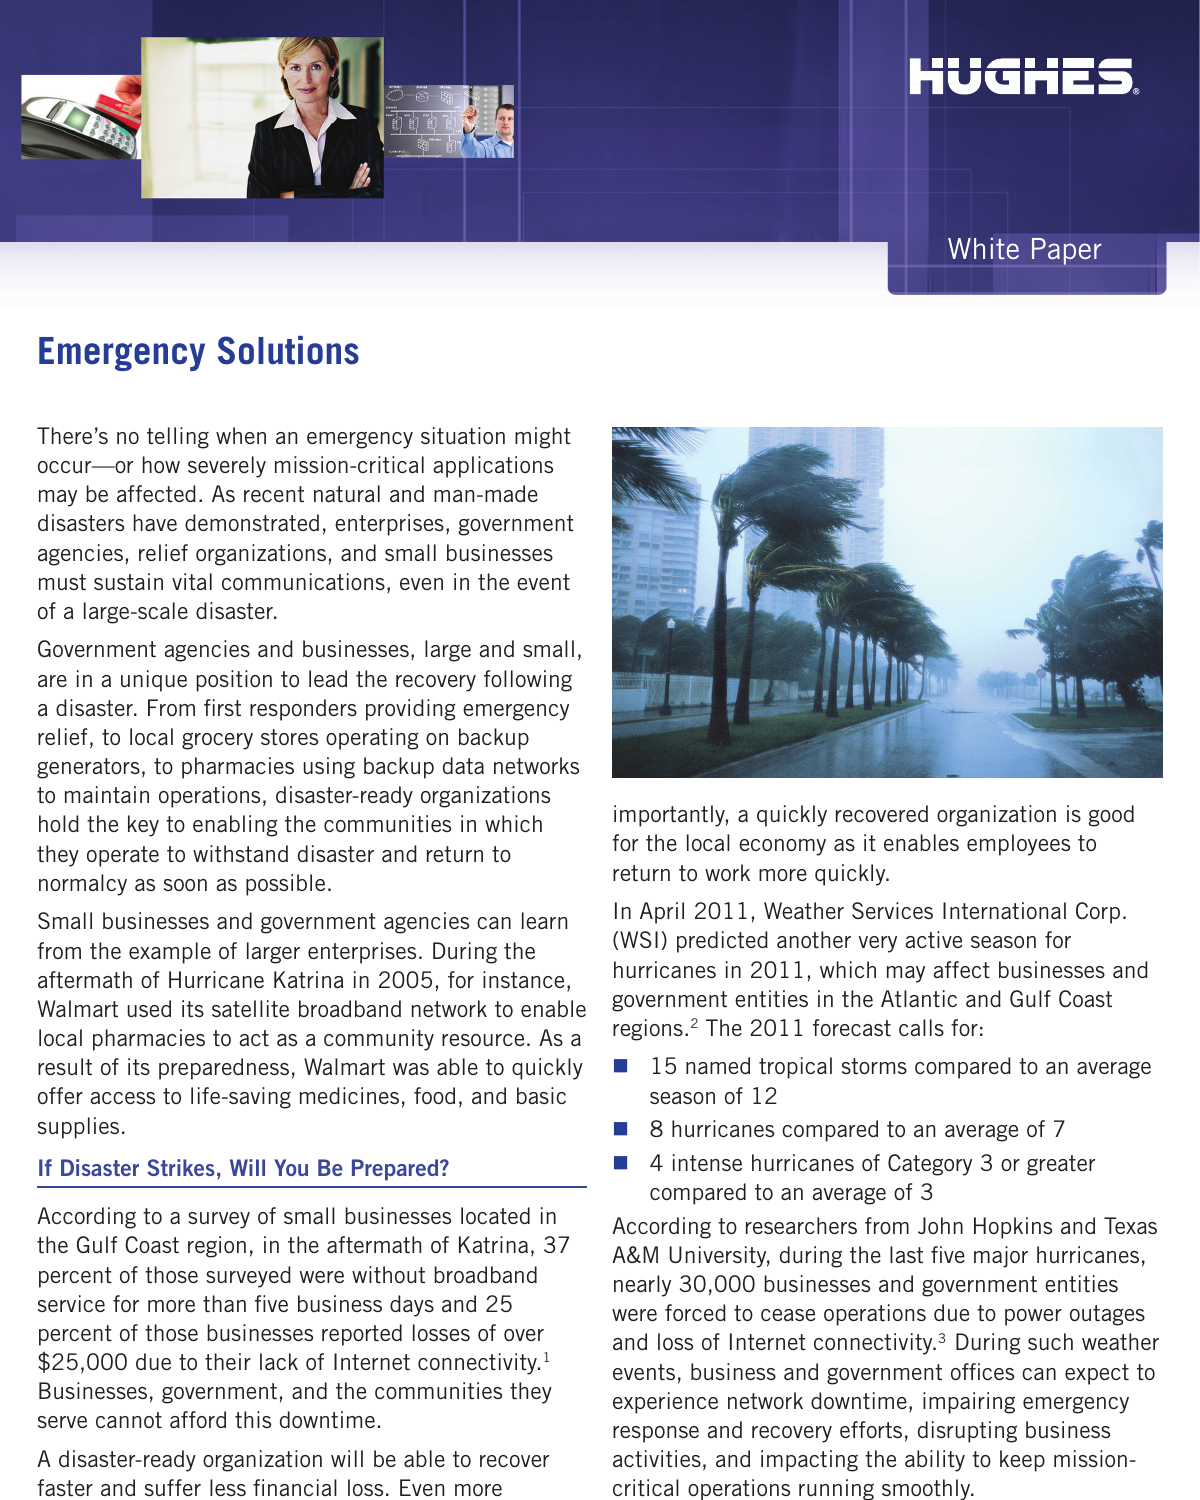 Page 1 of 4 - Emergency Solutions H43297 HR 1212